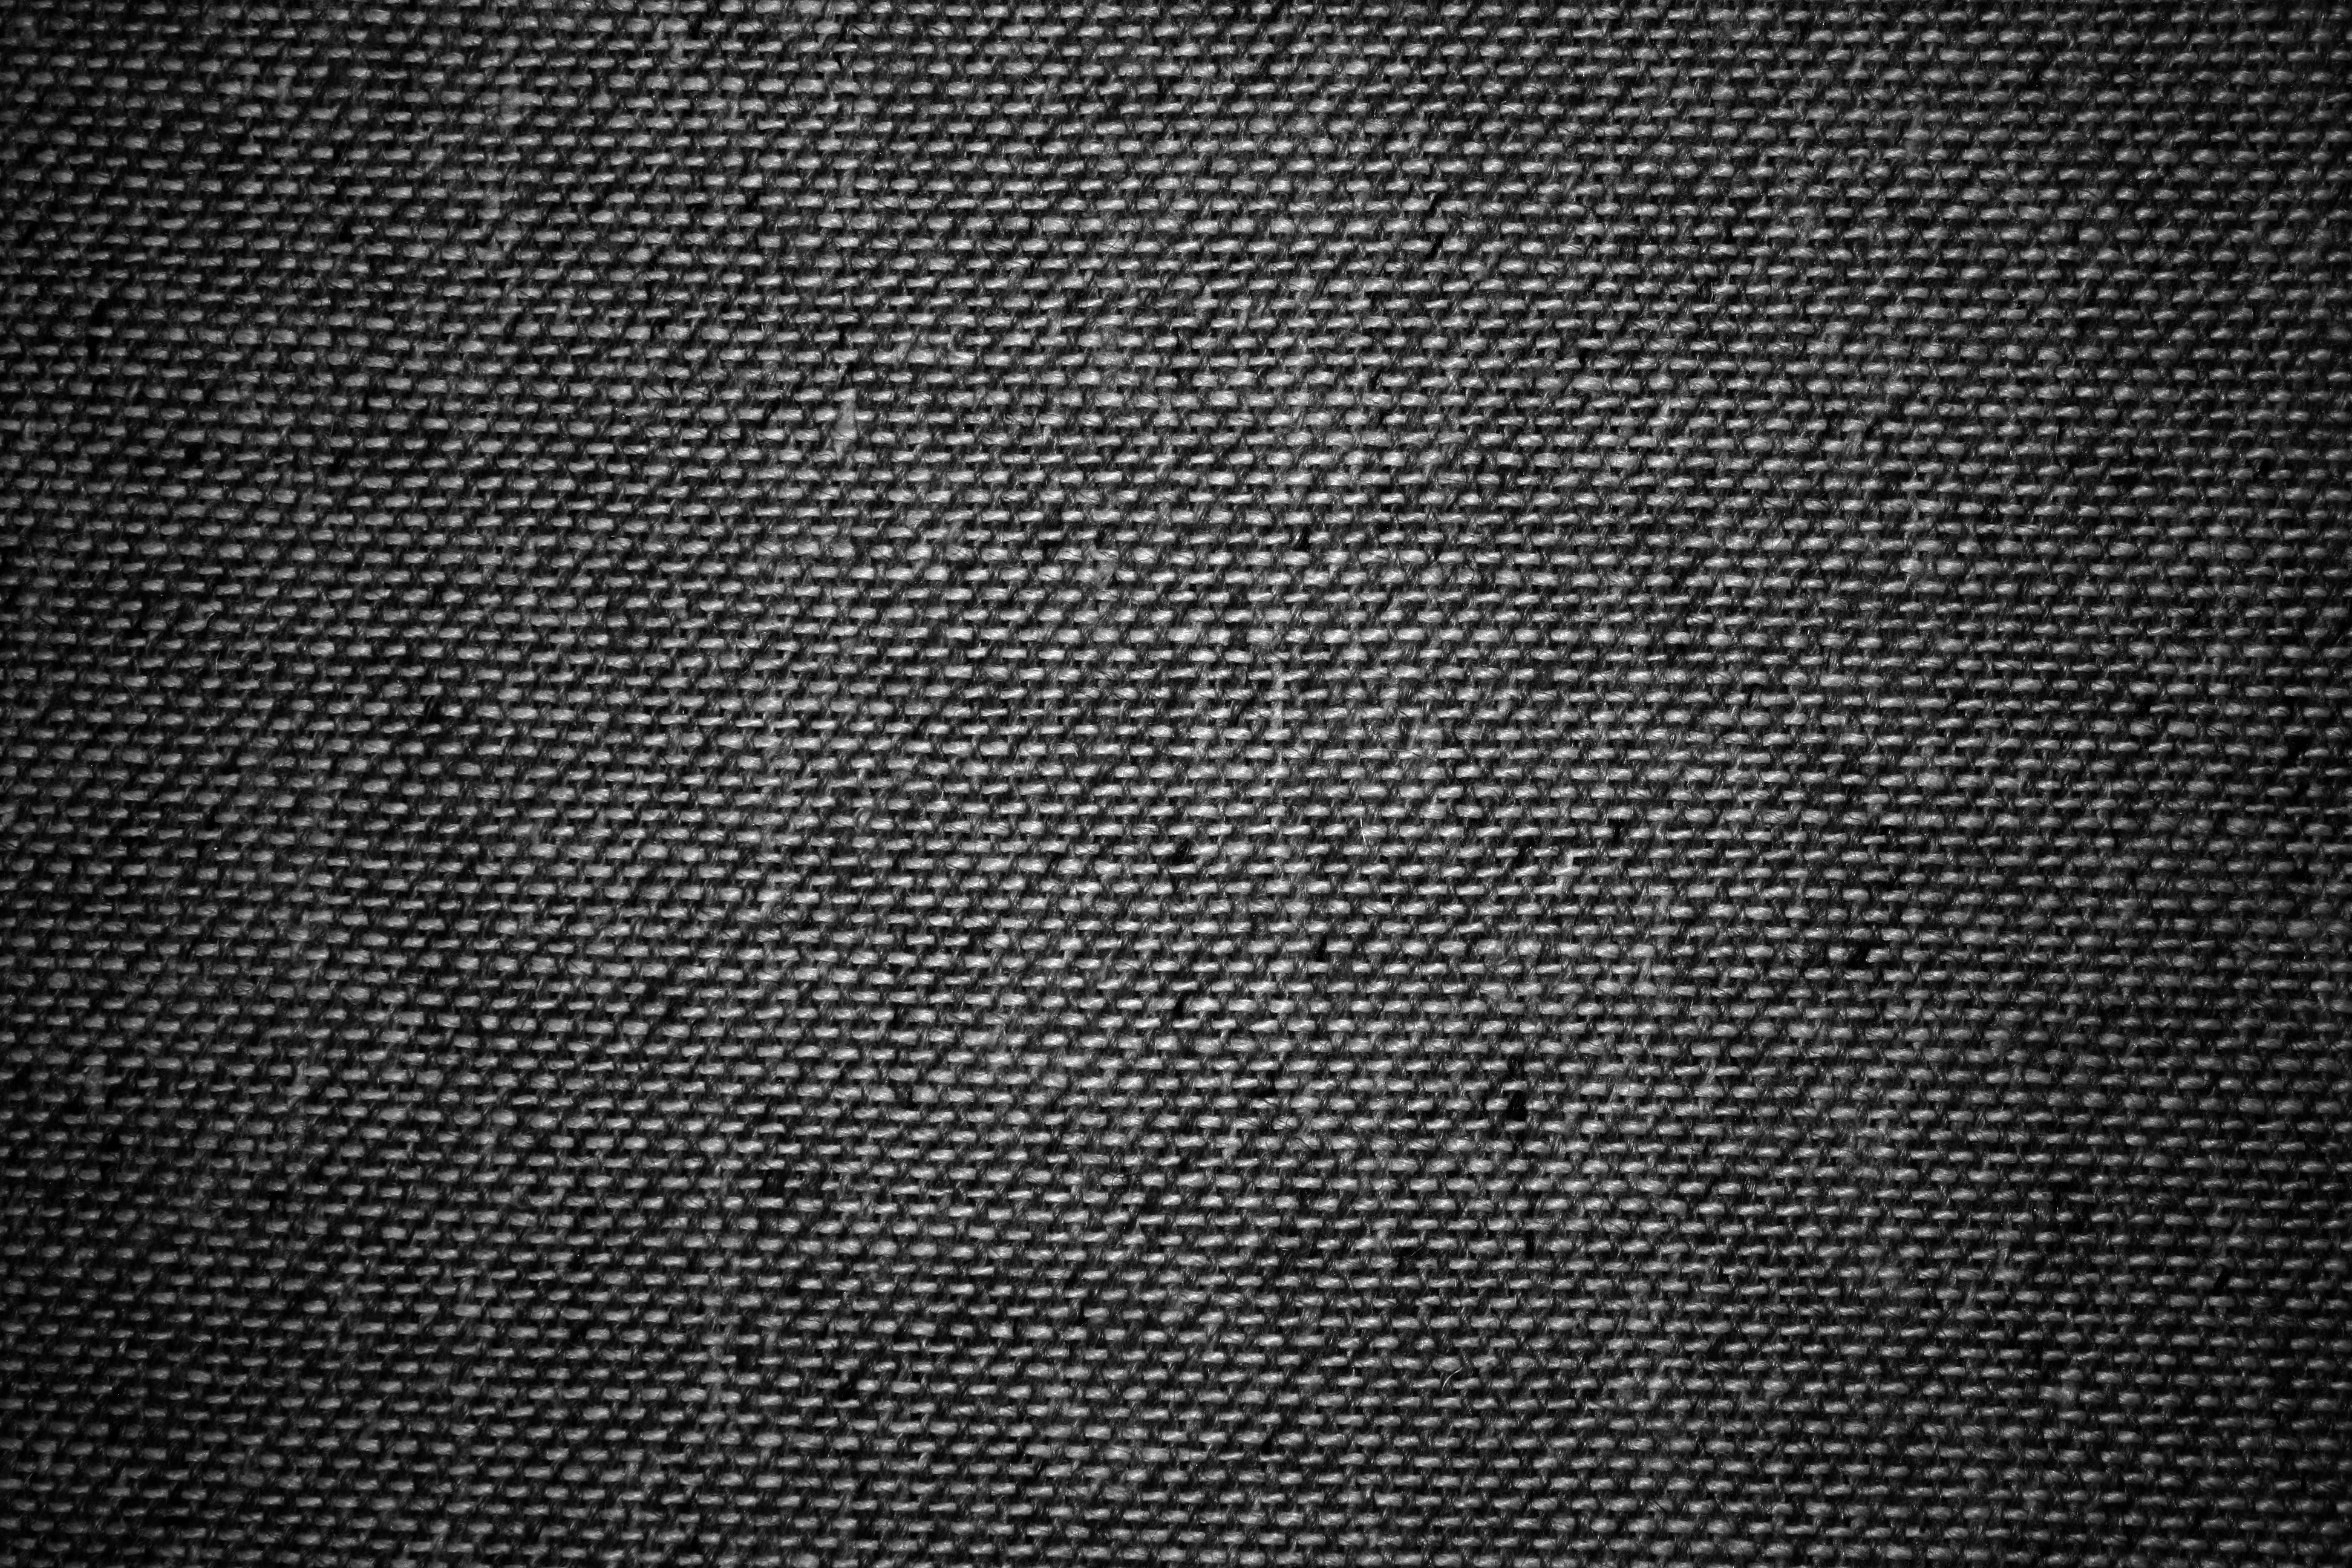 Black And White Fabric Texture